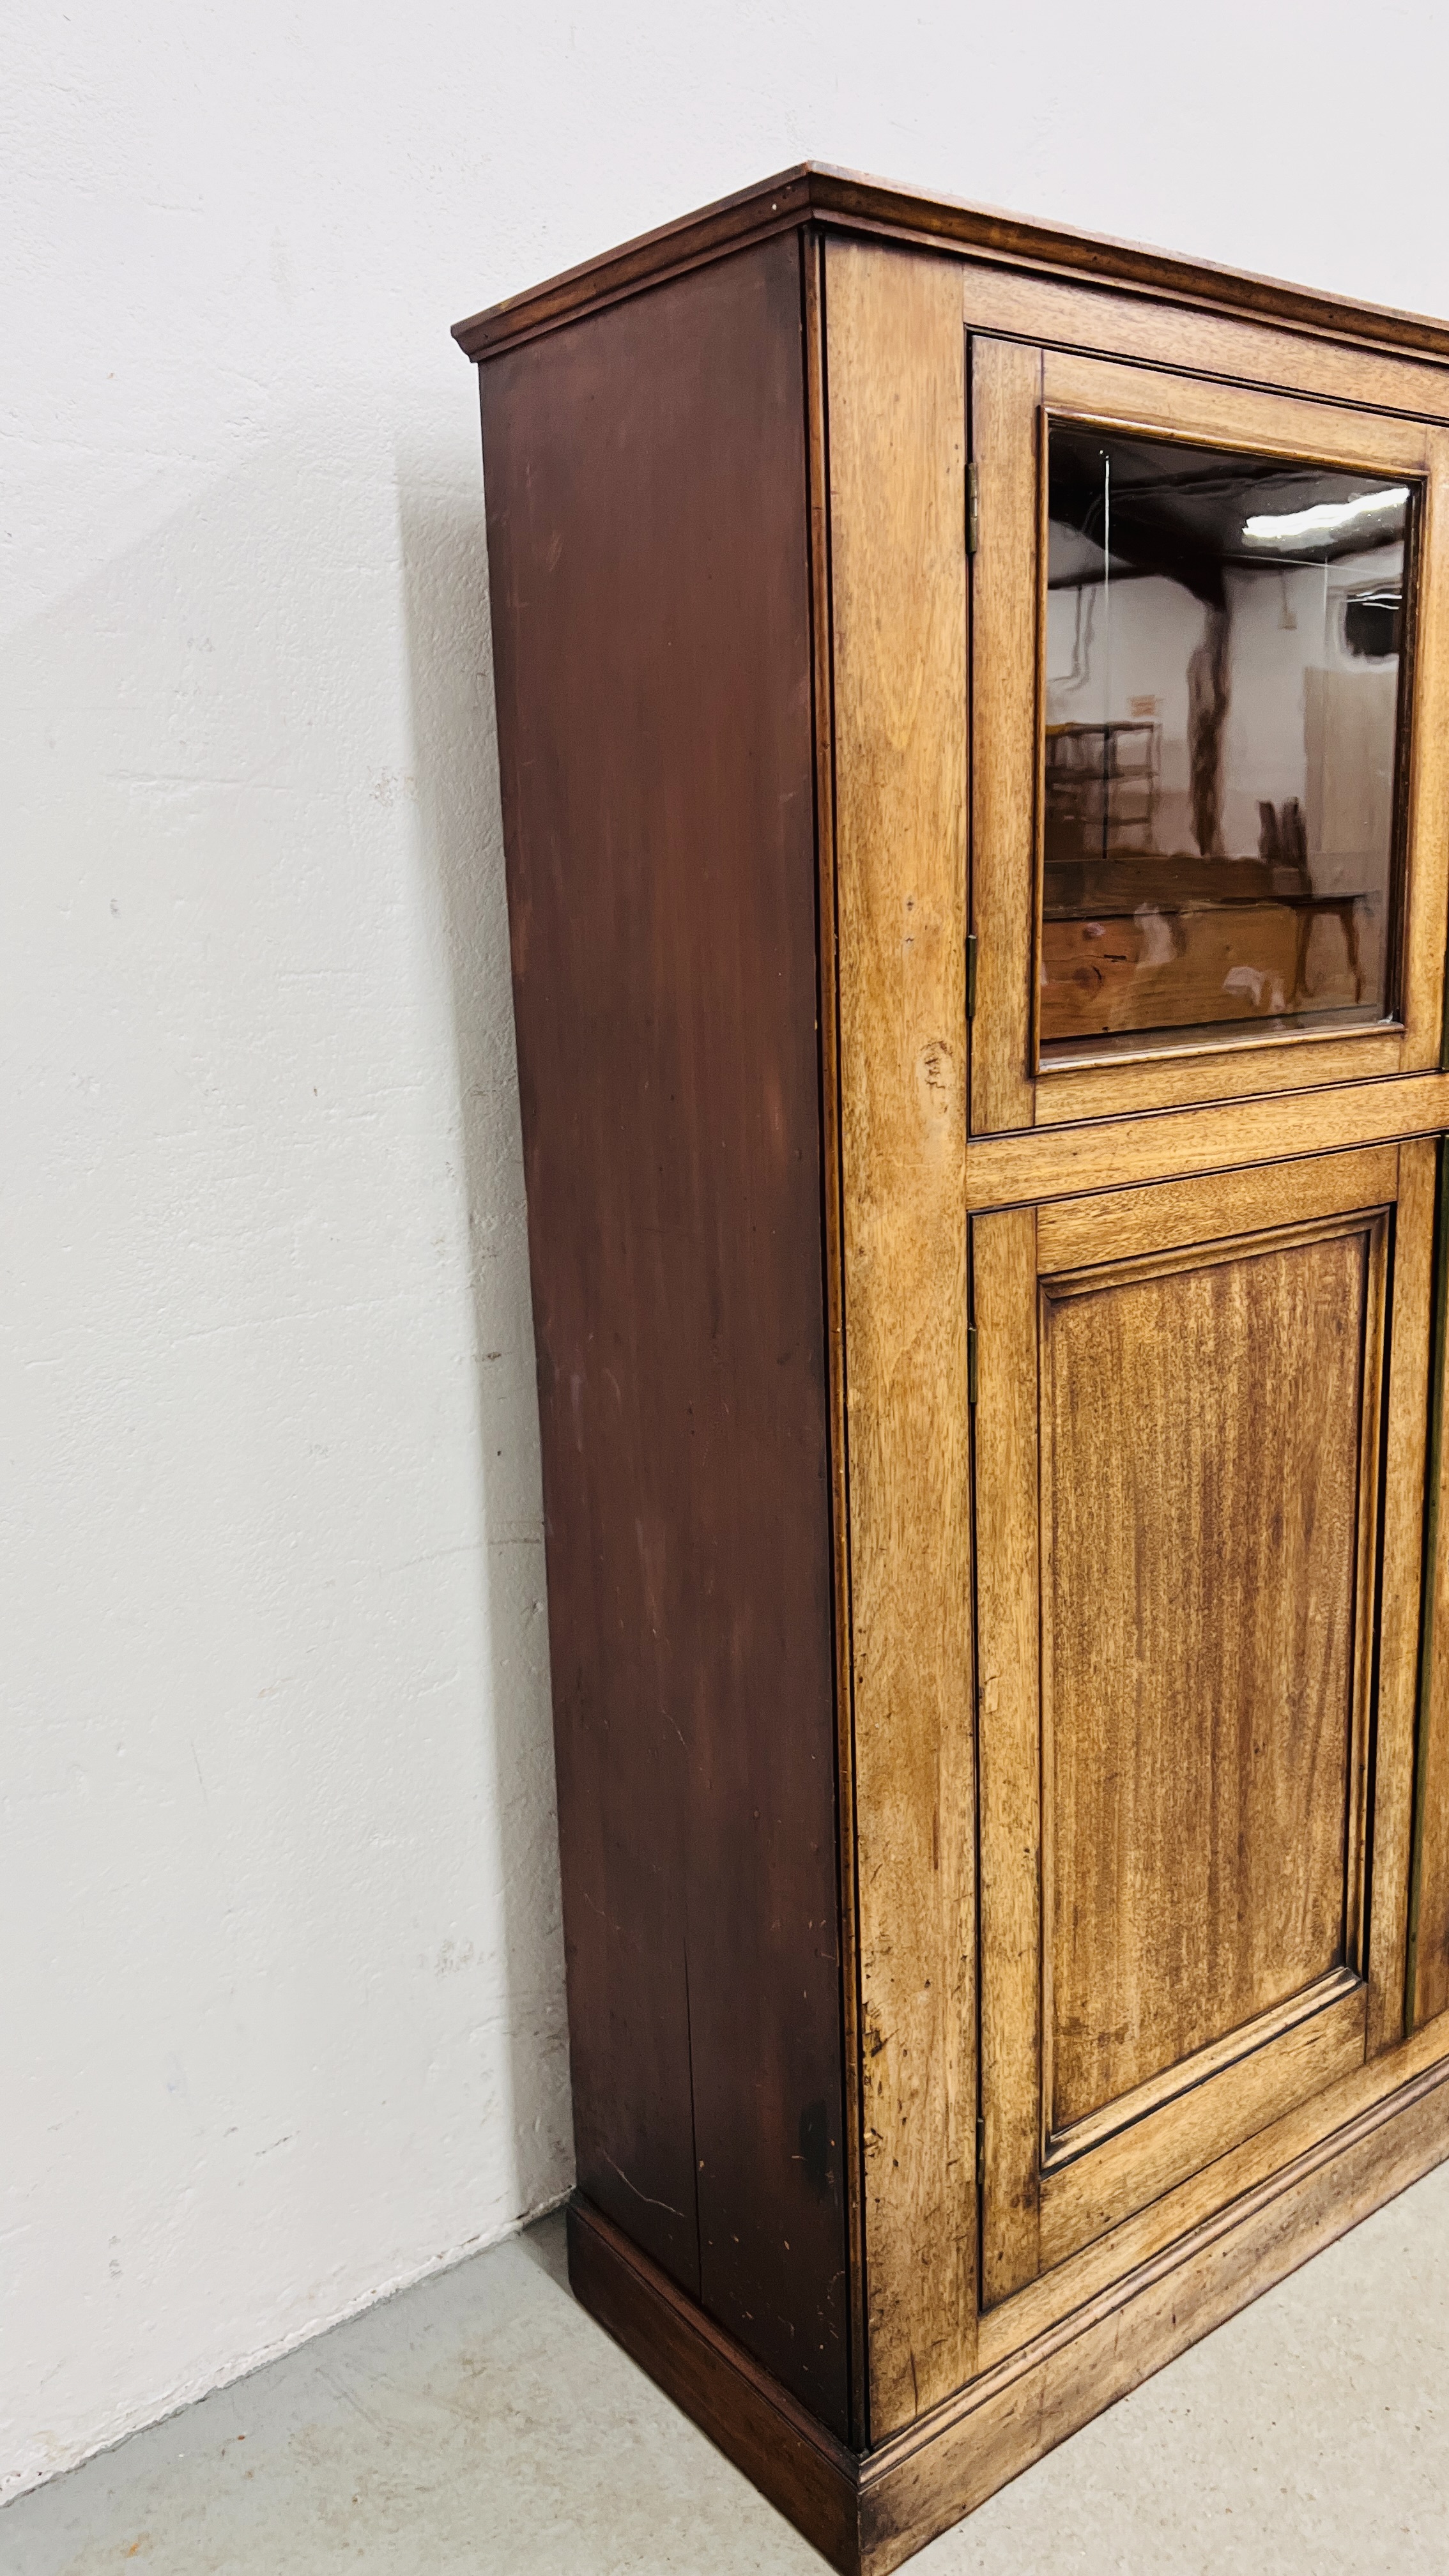 A MAHOGANY TWO DOOR CUPBOARD WITH GLAZED TWO DOOR CABINET ABOVE, W 112CM, D 33CM, H 131CM. - Image 5 of 8